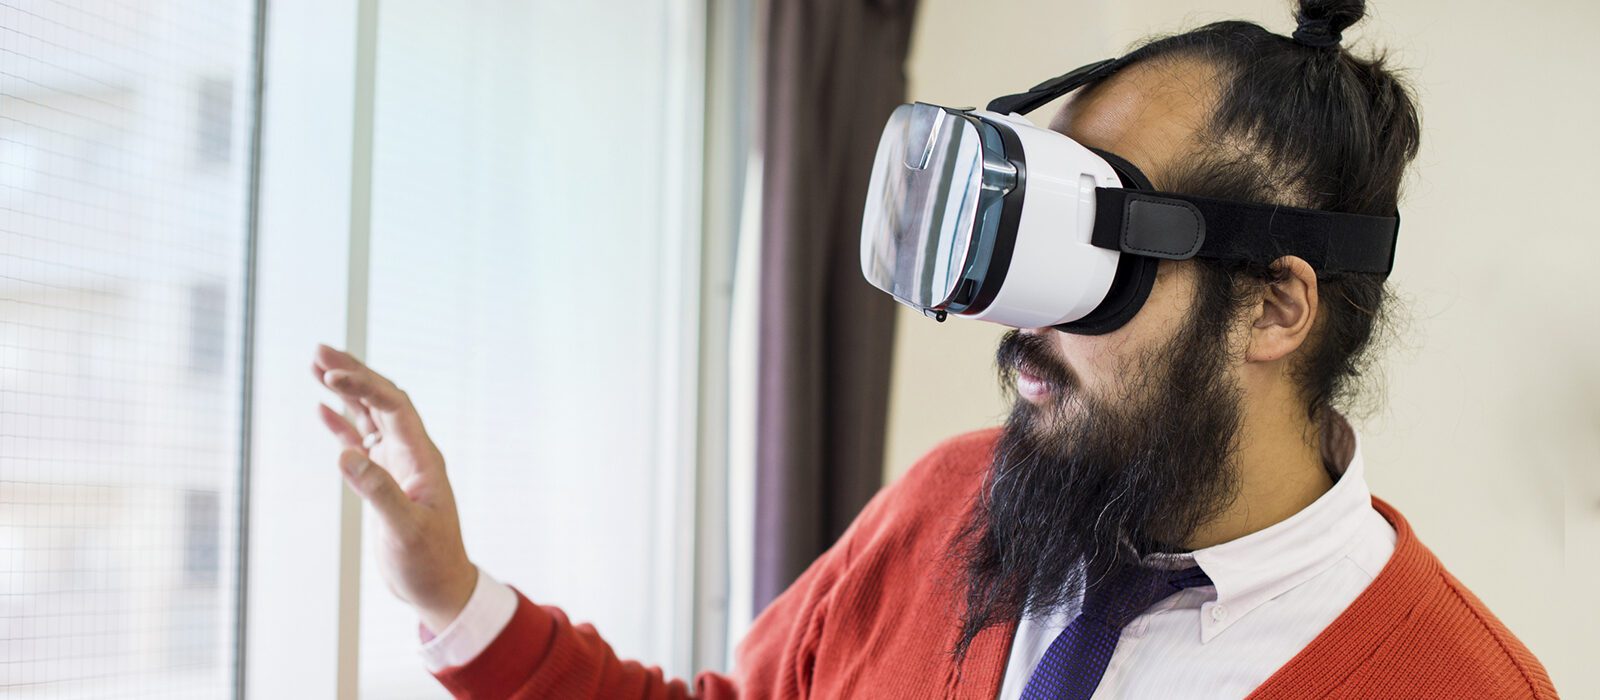 Person wearing virtual reality headset with hands gesturing at something viewing.